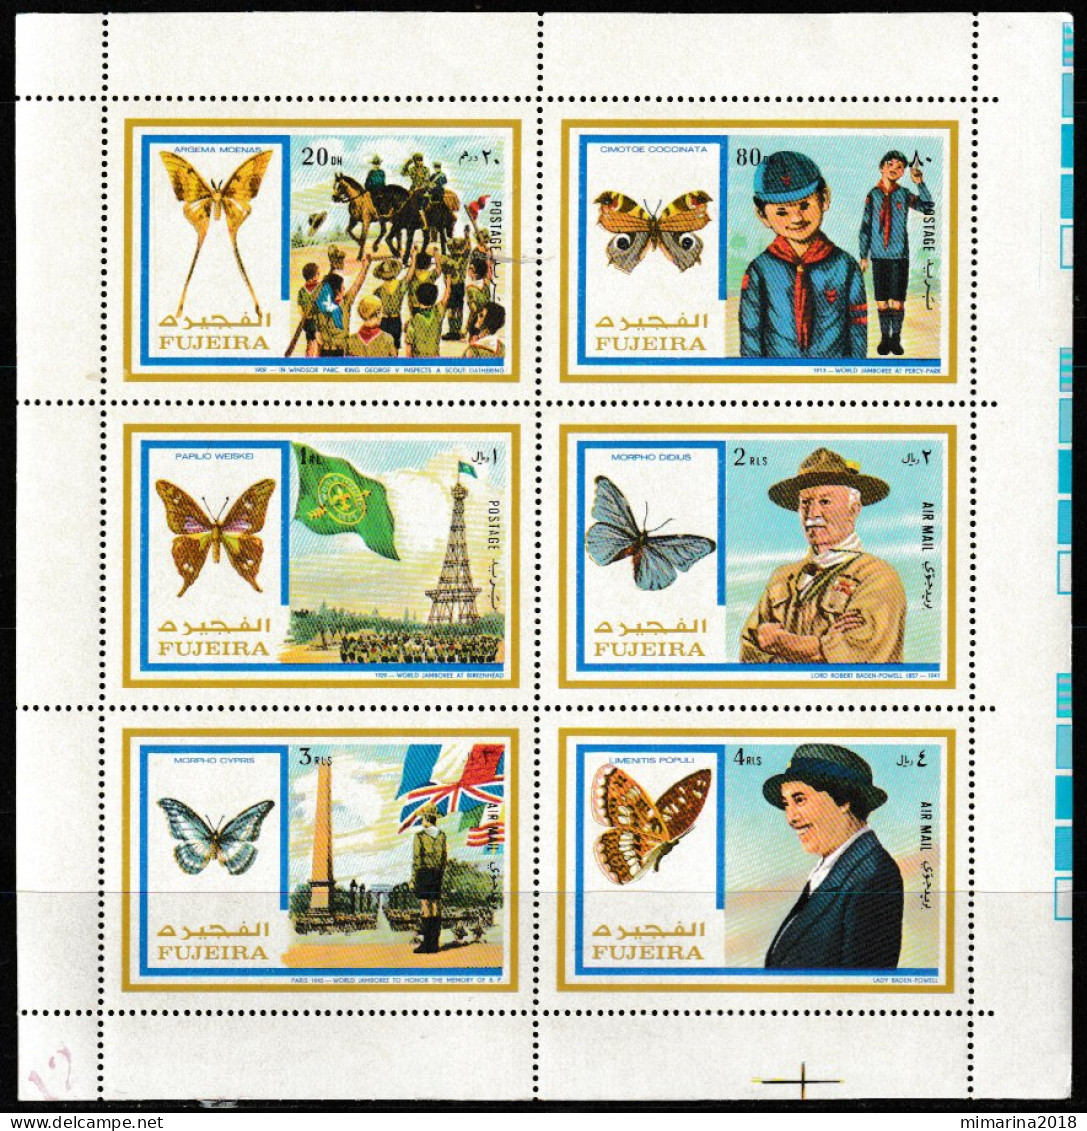 FUJEIRA  1972  MNH  "SCOUTING" - Unused Stamps